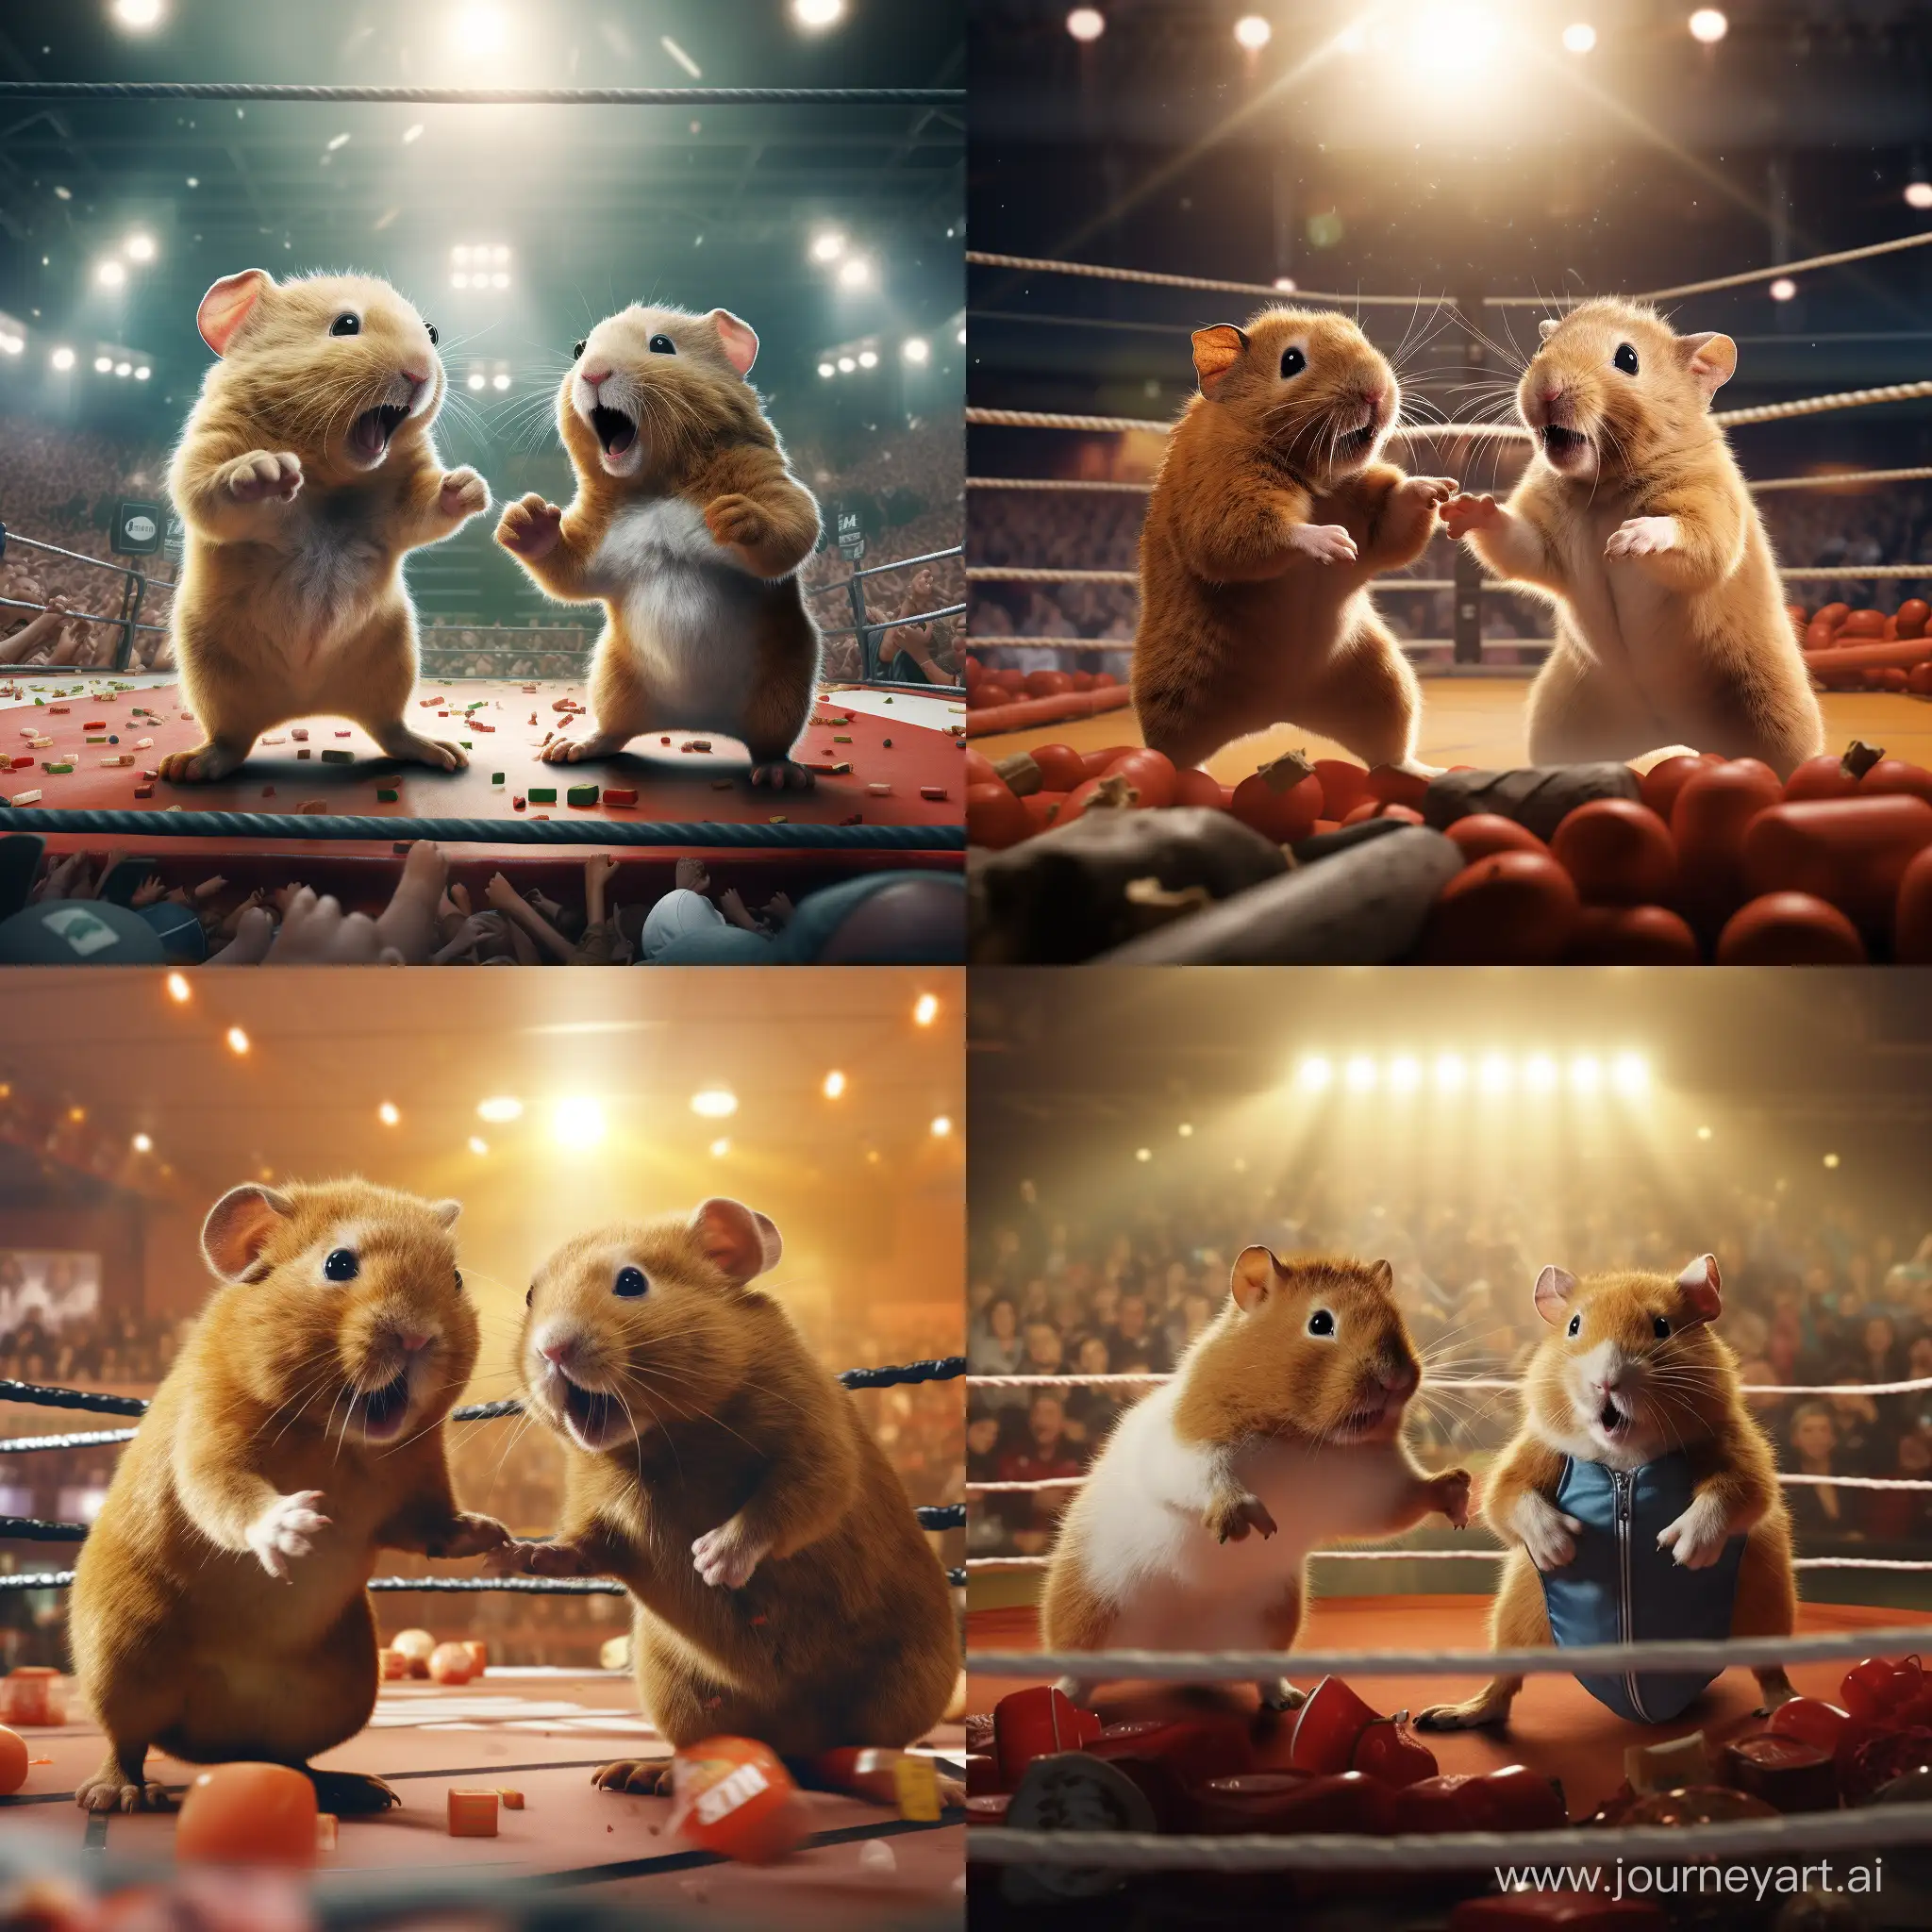 Adorable-Hamster-Kickboxing-Match-Thrills-Enthusiastic-Rodent-Audience